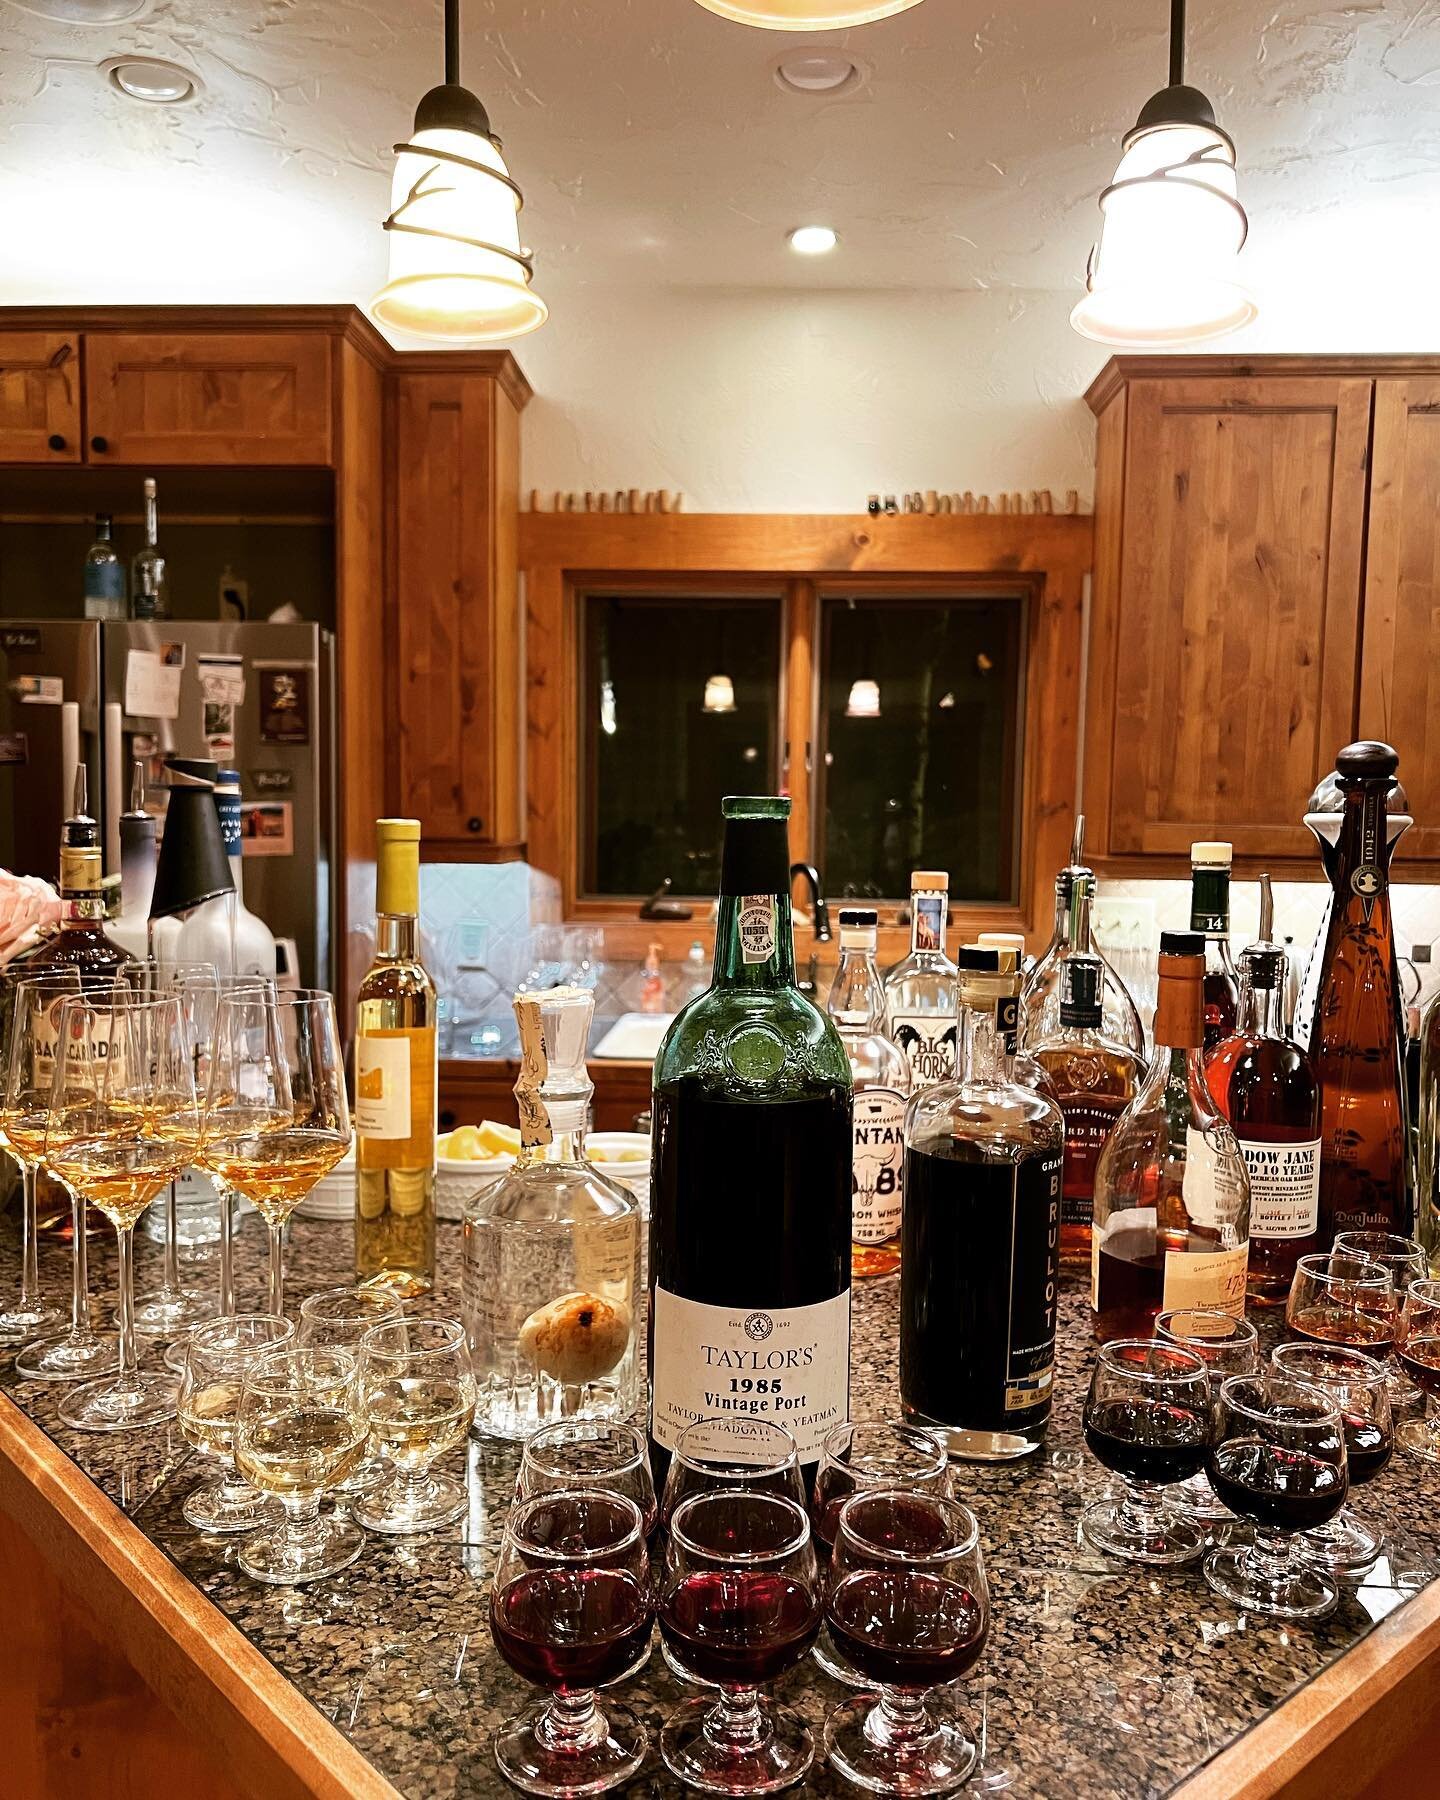 A great event up at the Spanish Peaks! The highlight was serving an exceptional 1985 Taylor&rsquo;s Port to our guests.

#prideinourpour 

&bull;DM for bookings or via our website. 

#privatebartender #cocktailcatering #mobilemixologist #mobilebar #w